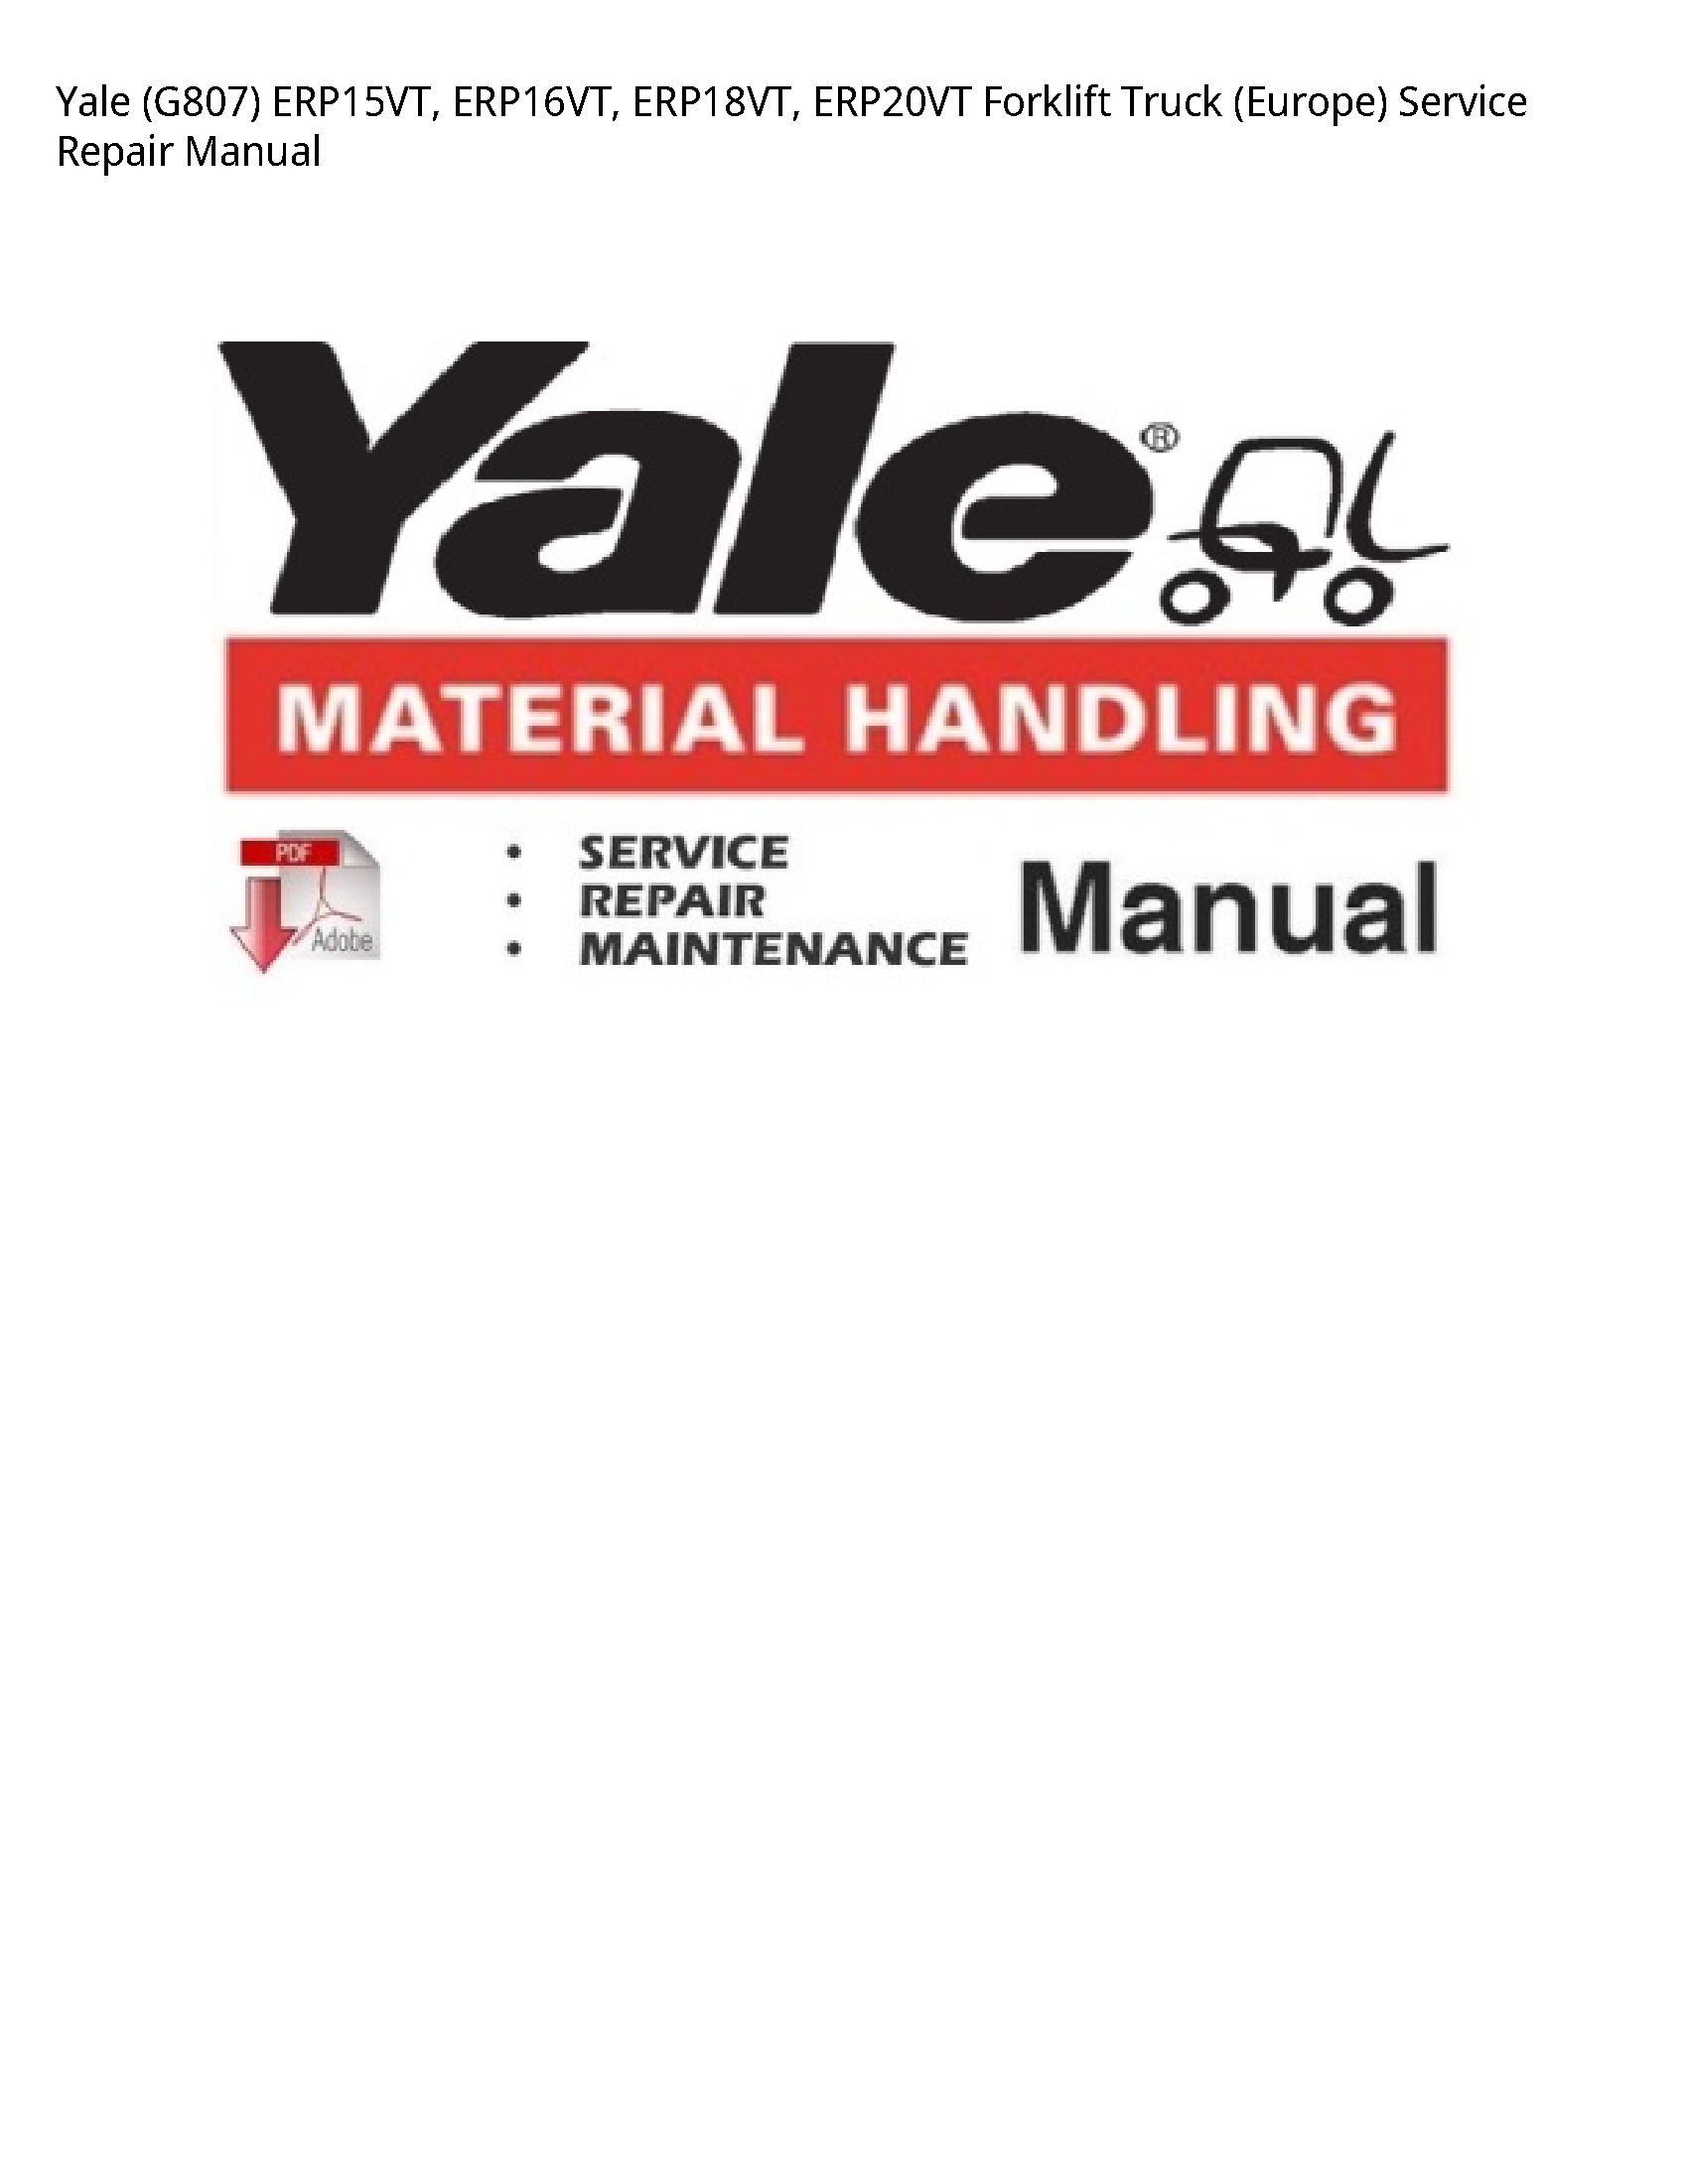 Yale (G807) Forklift Truck (Europe) manual